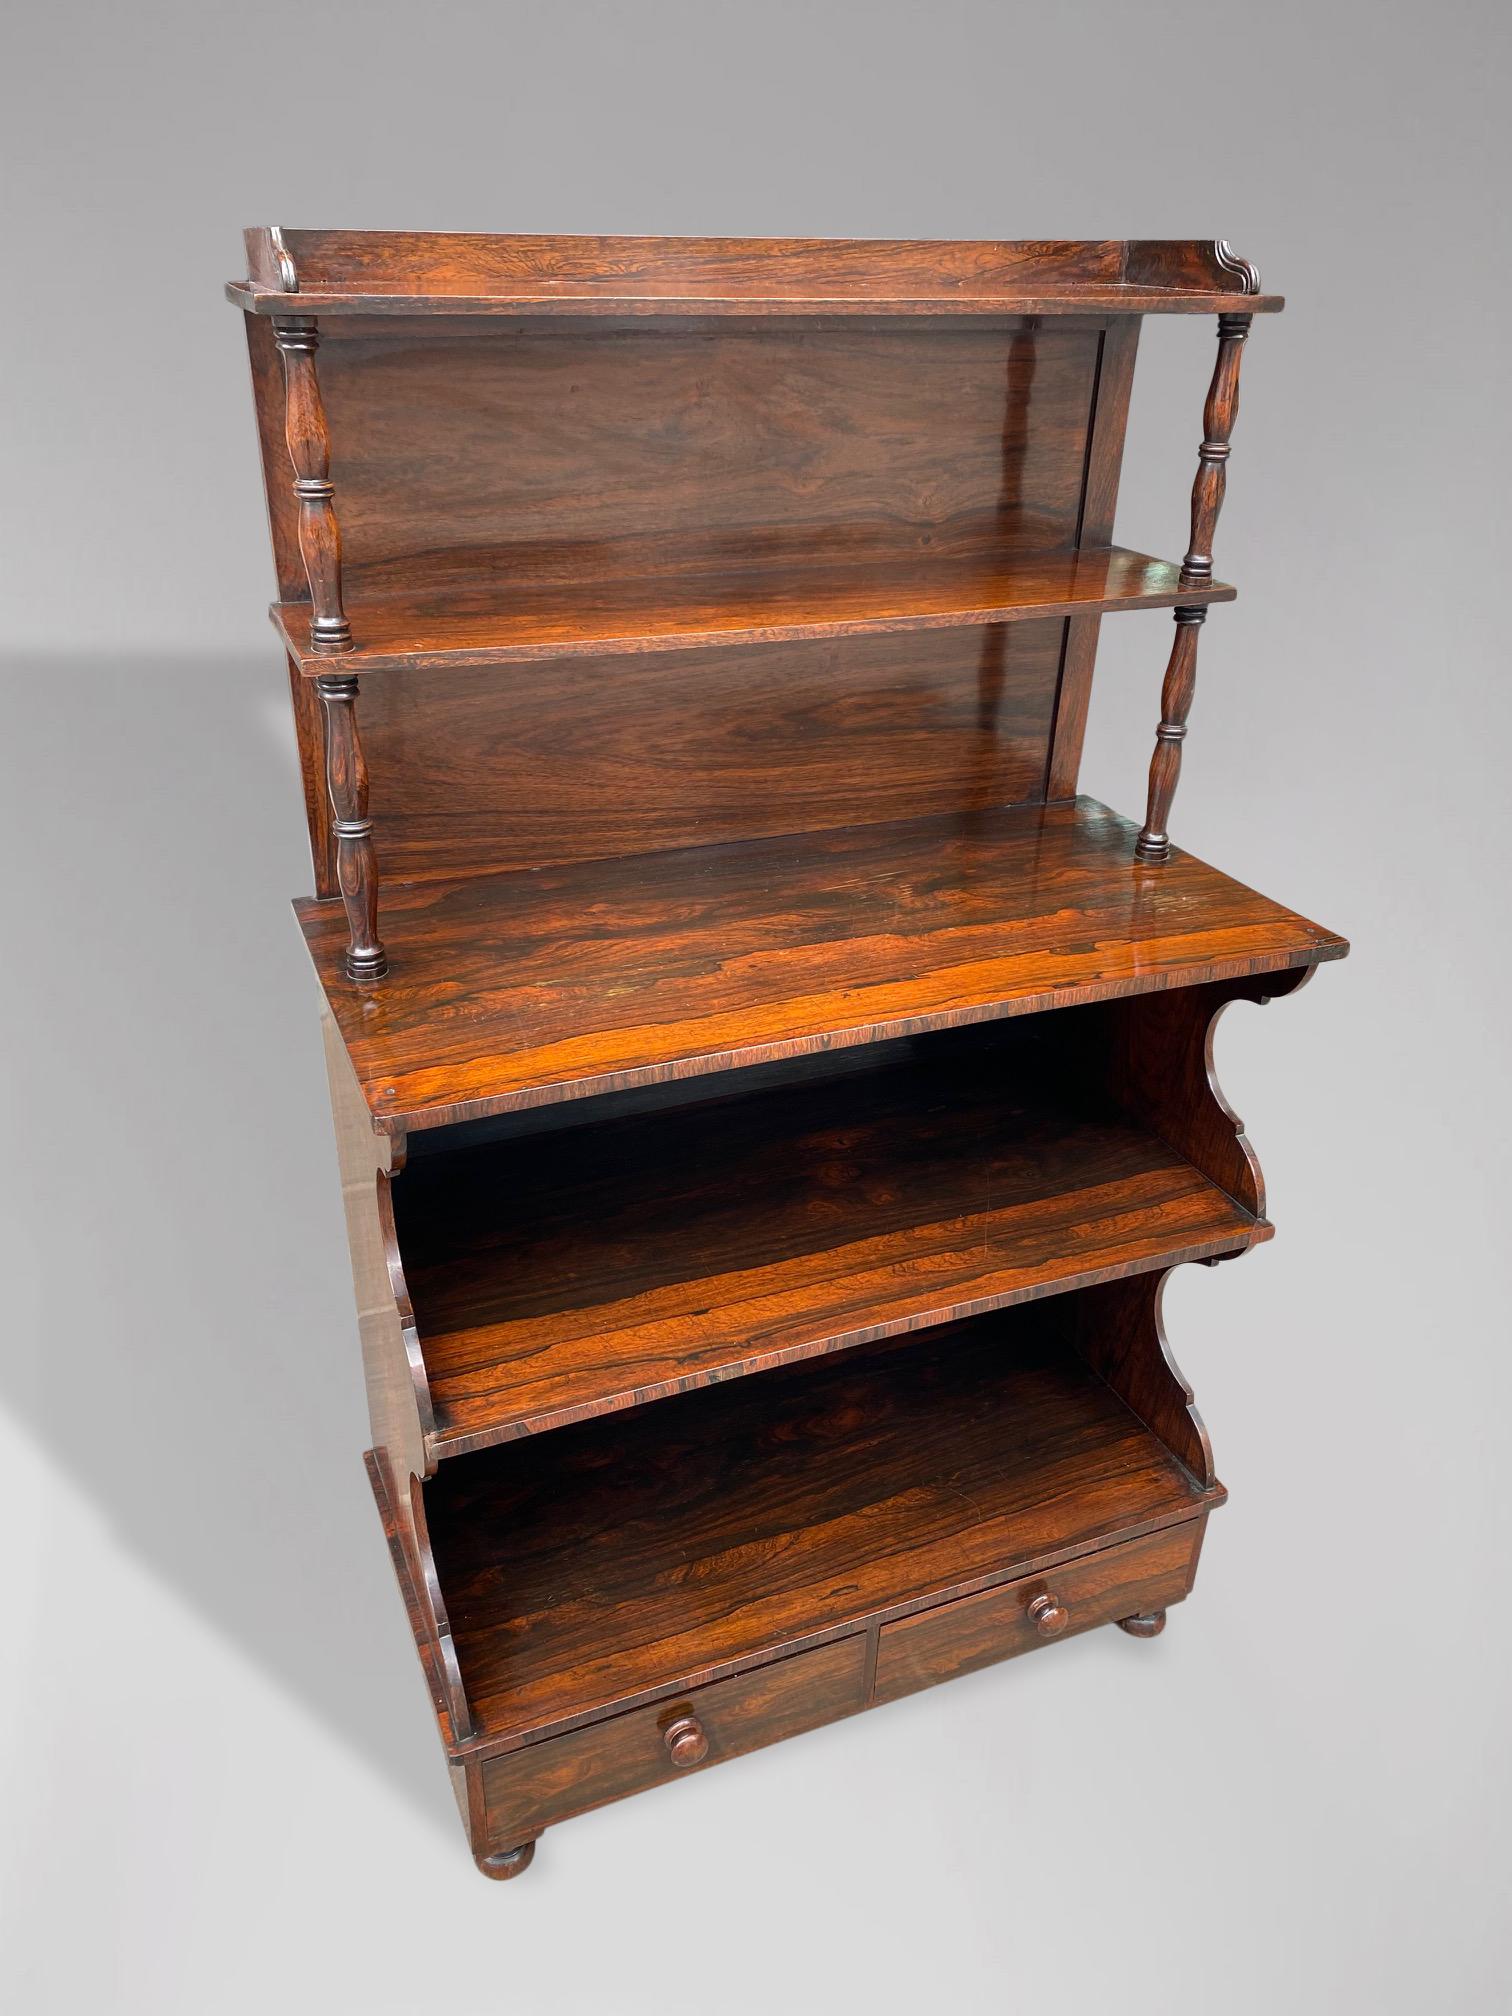 Polished 19th Century Regency Period Rosewood Shaped Open Bookcase